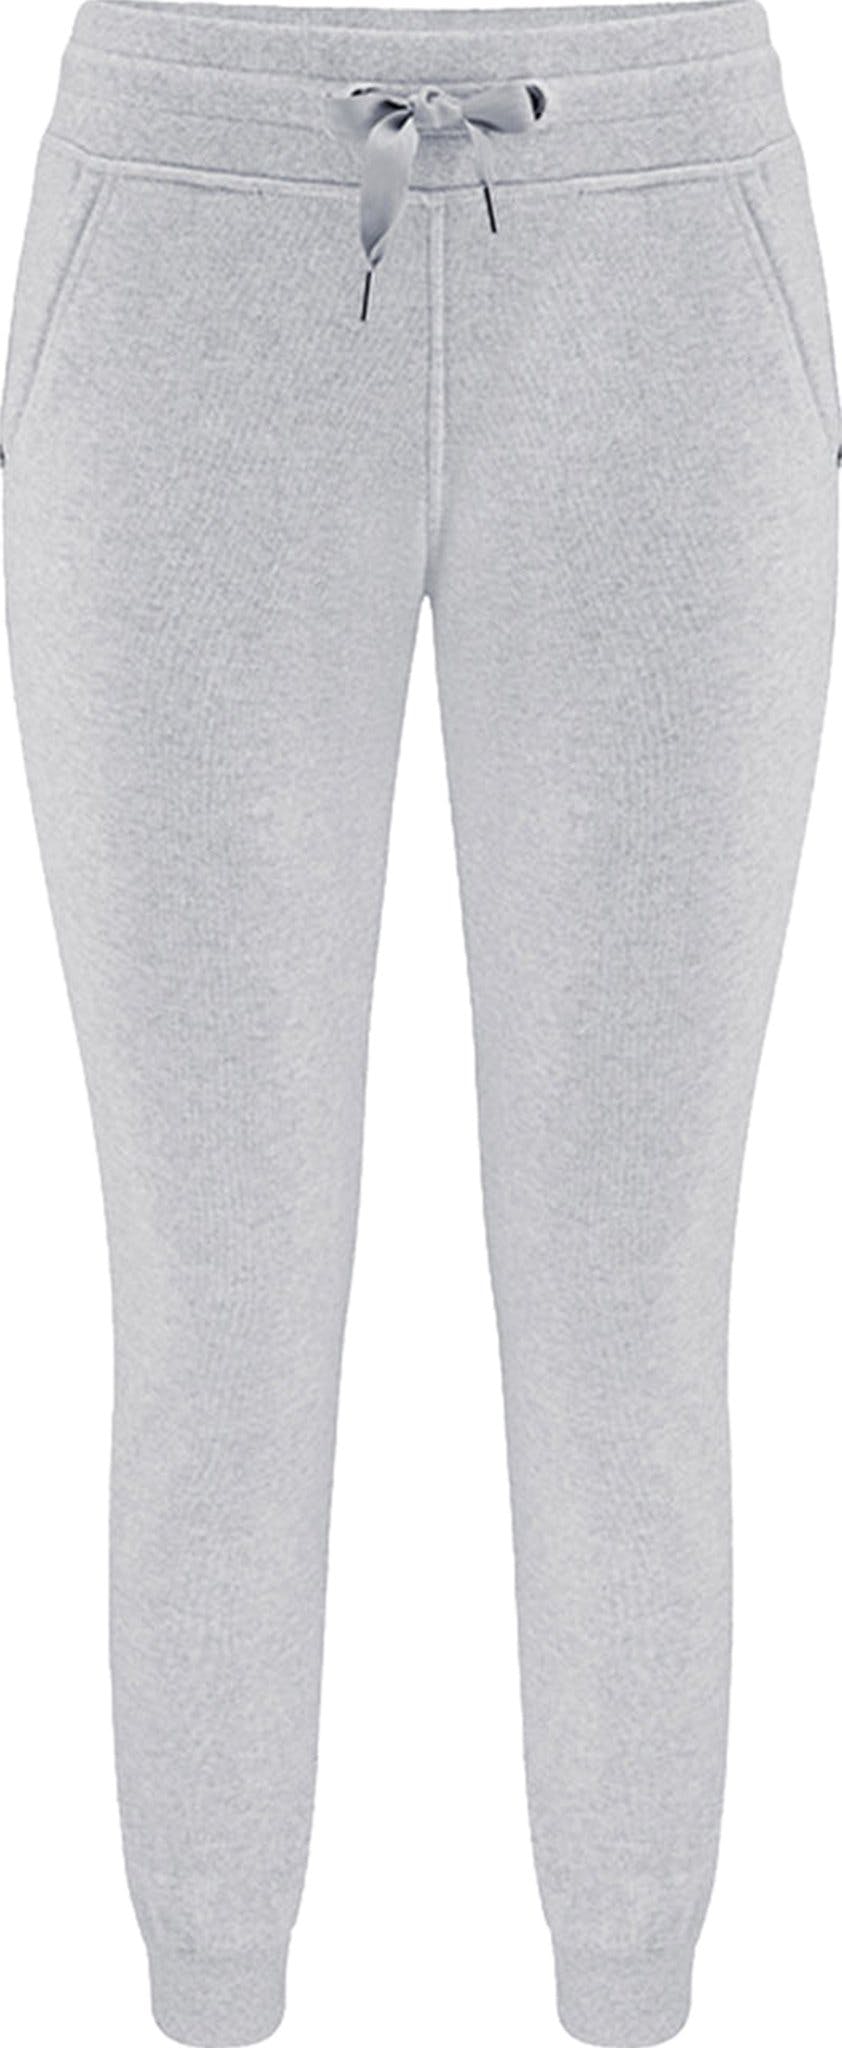 Product image for Tind Jogger - Women's